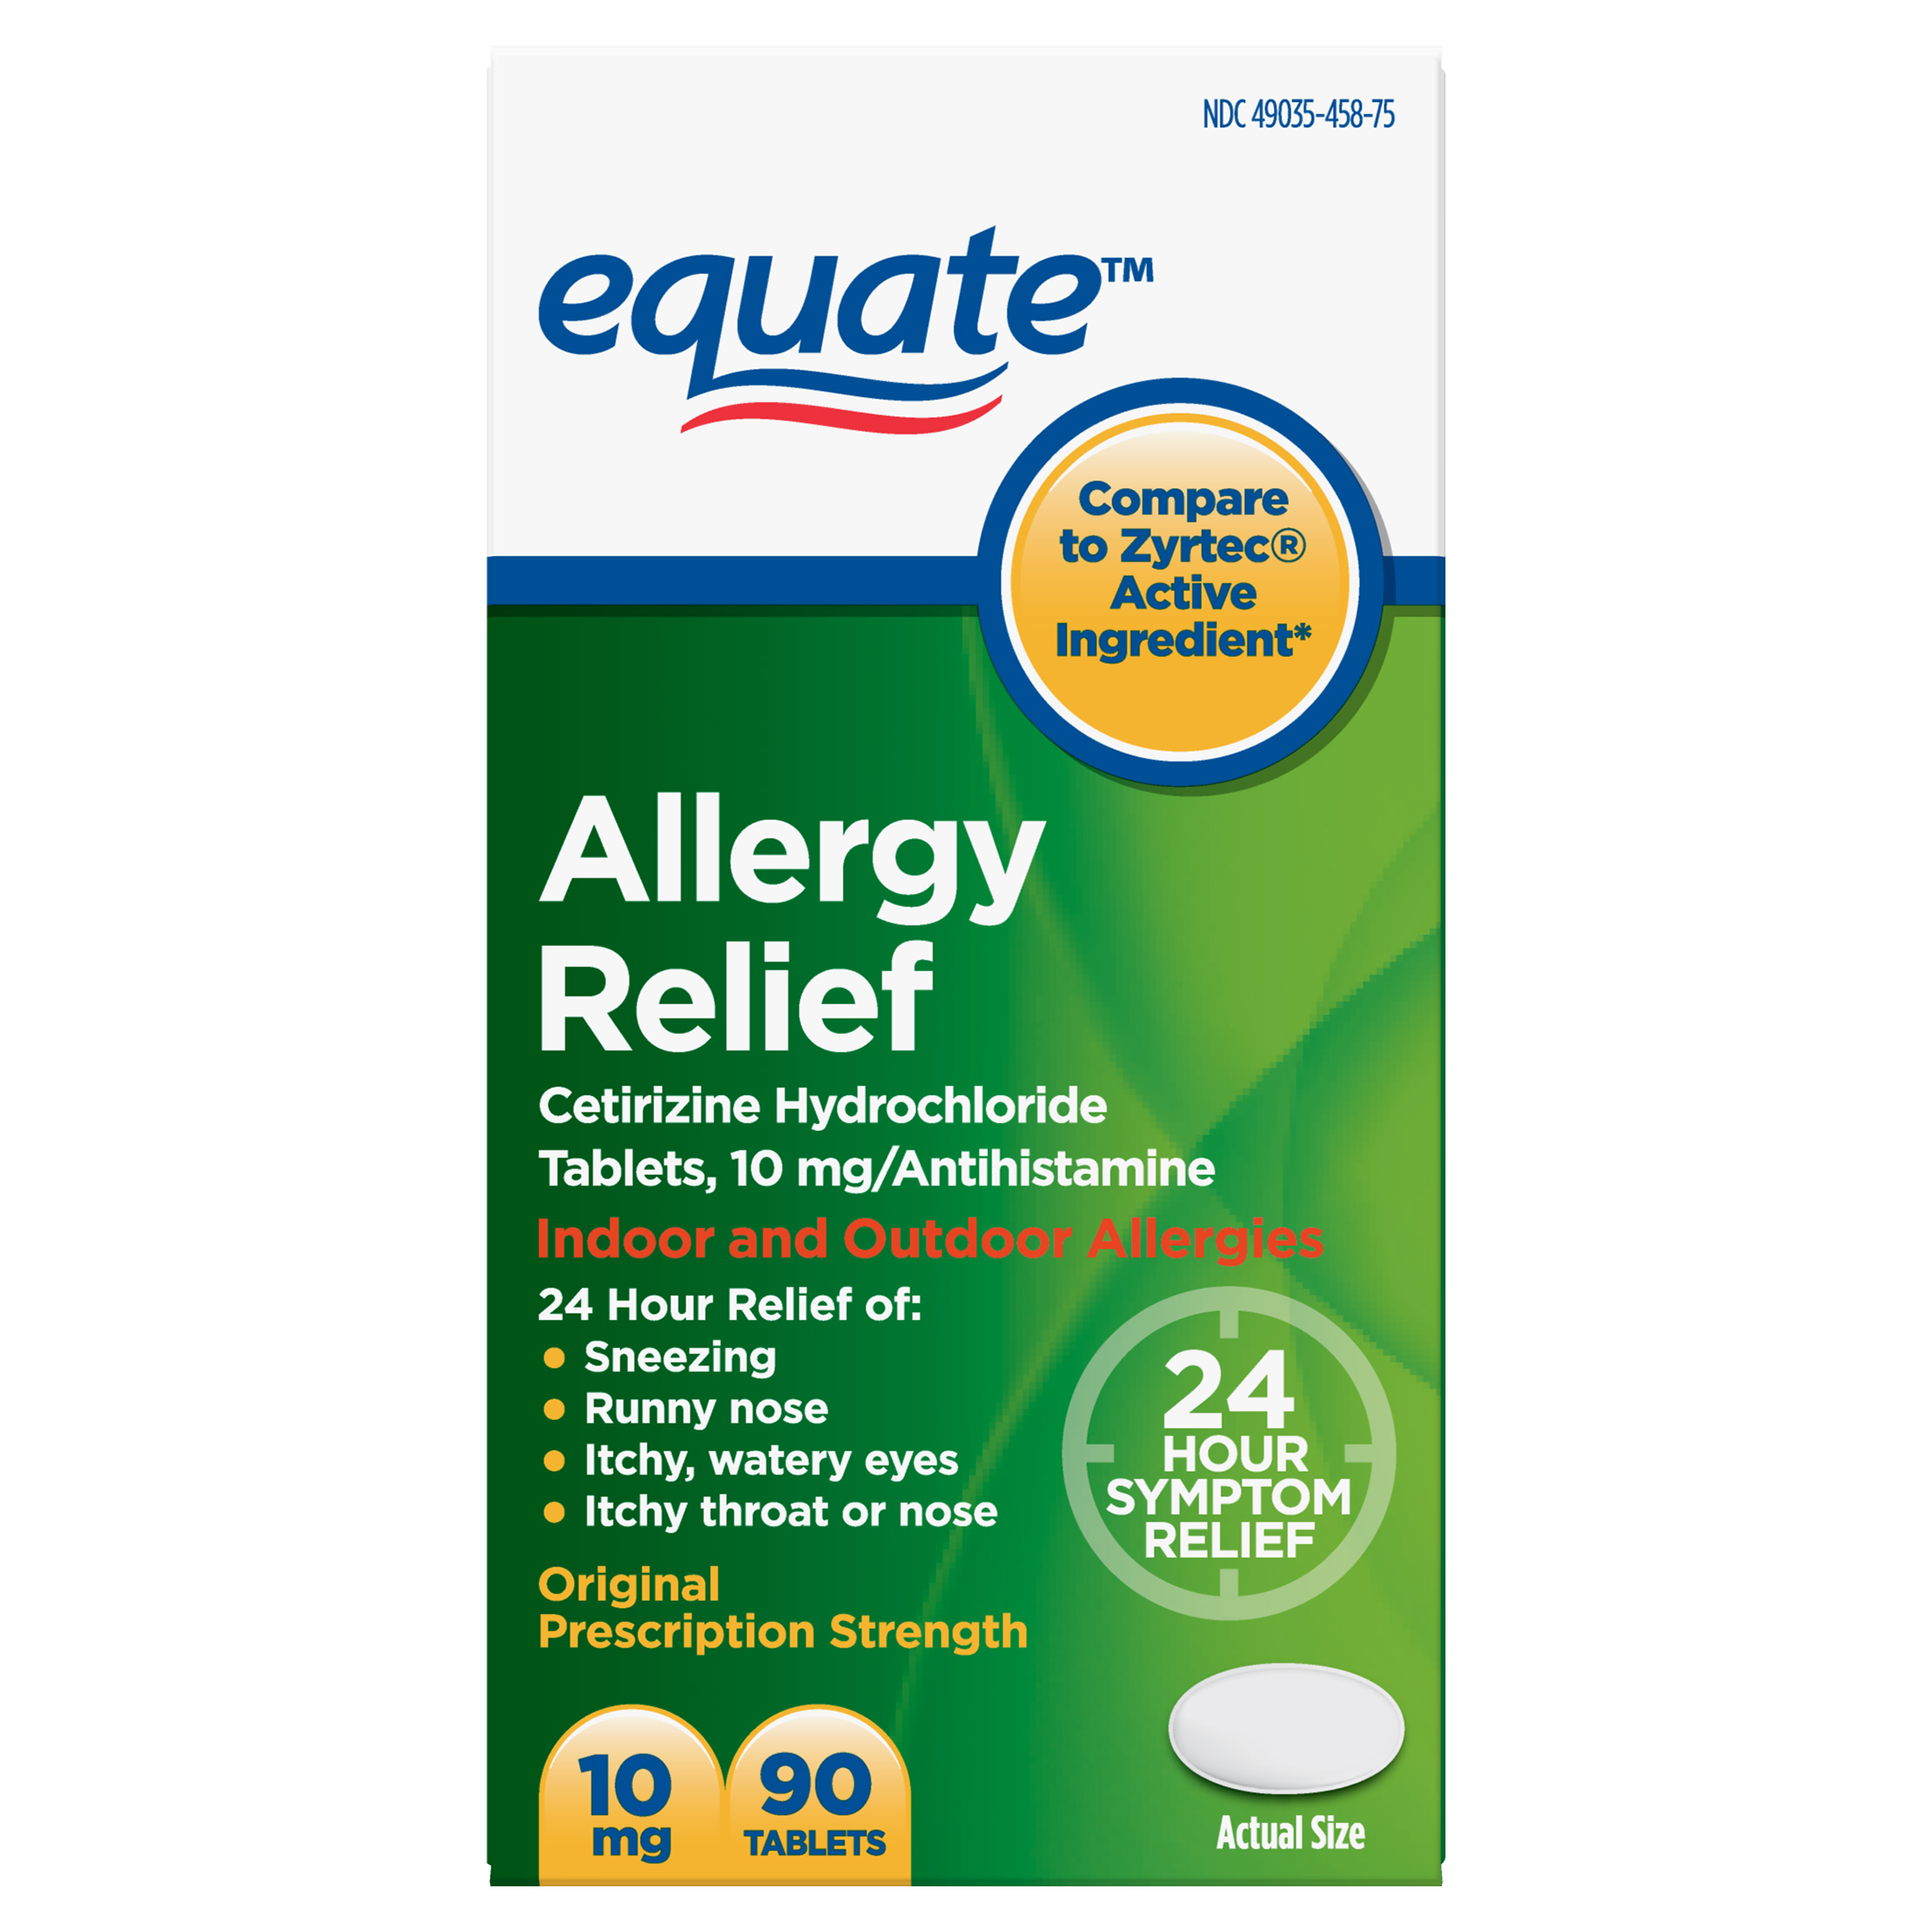 Equate 24 Hour Allergy, Cetirizine Hydrochloride Tablets, 10 mg, 90 Count - image 1 of 8